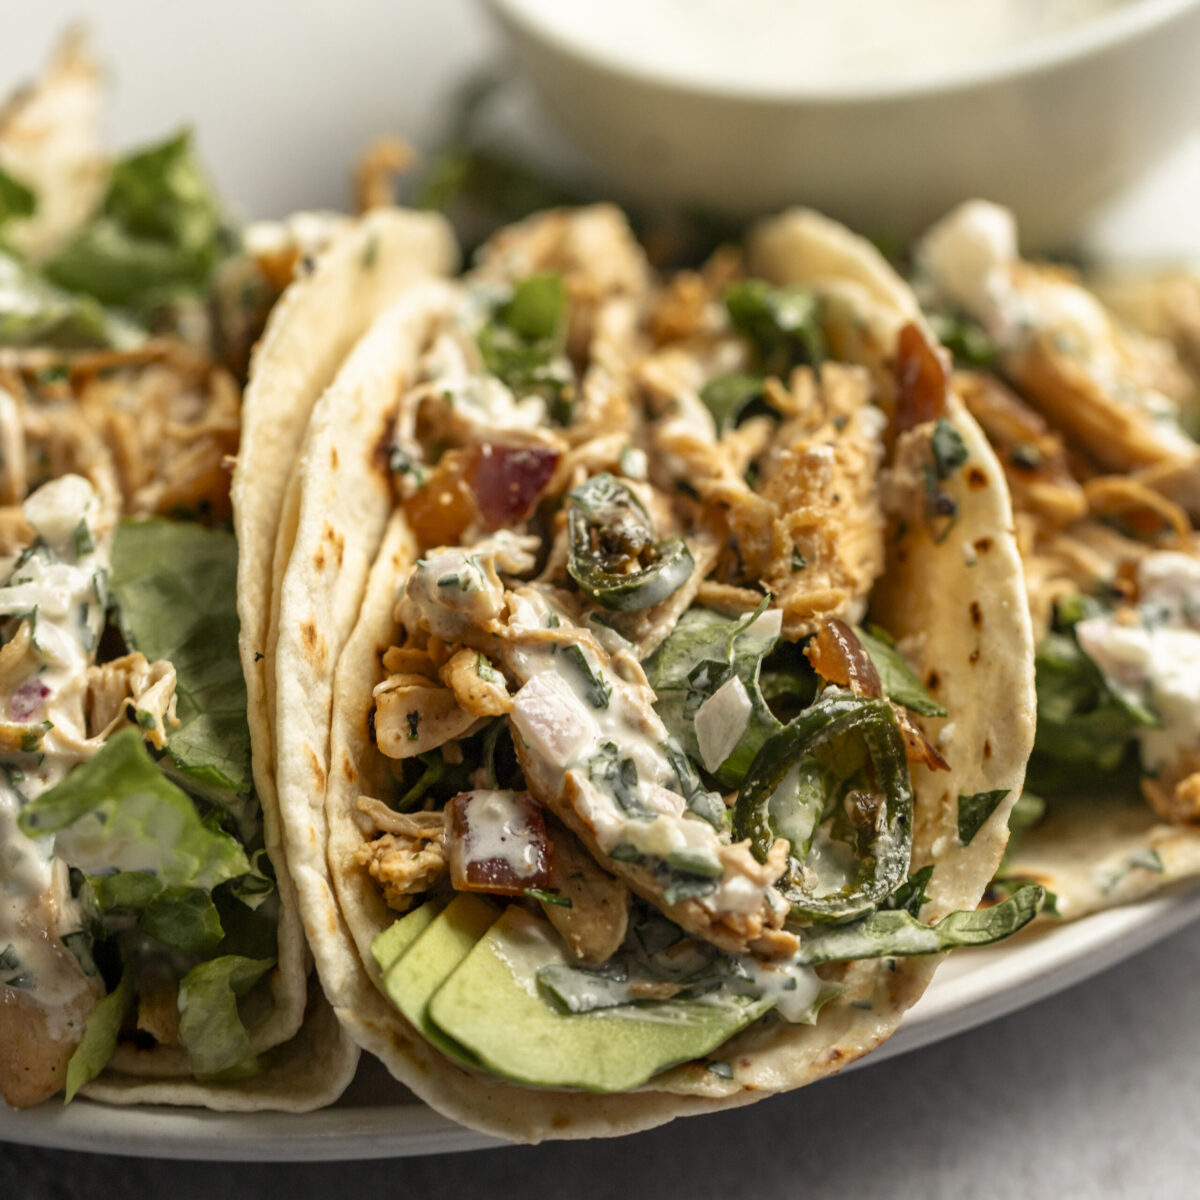 A closeup shot of a tortilla stuffed with shredded chicken, lettuce, avocado slices, all drizzled with a creamy sauce. Three tacos rest on a plate with a small bowl in the background.